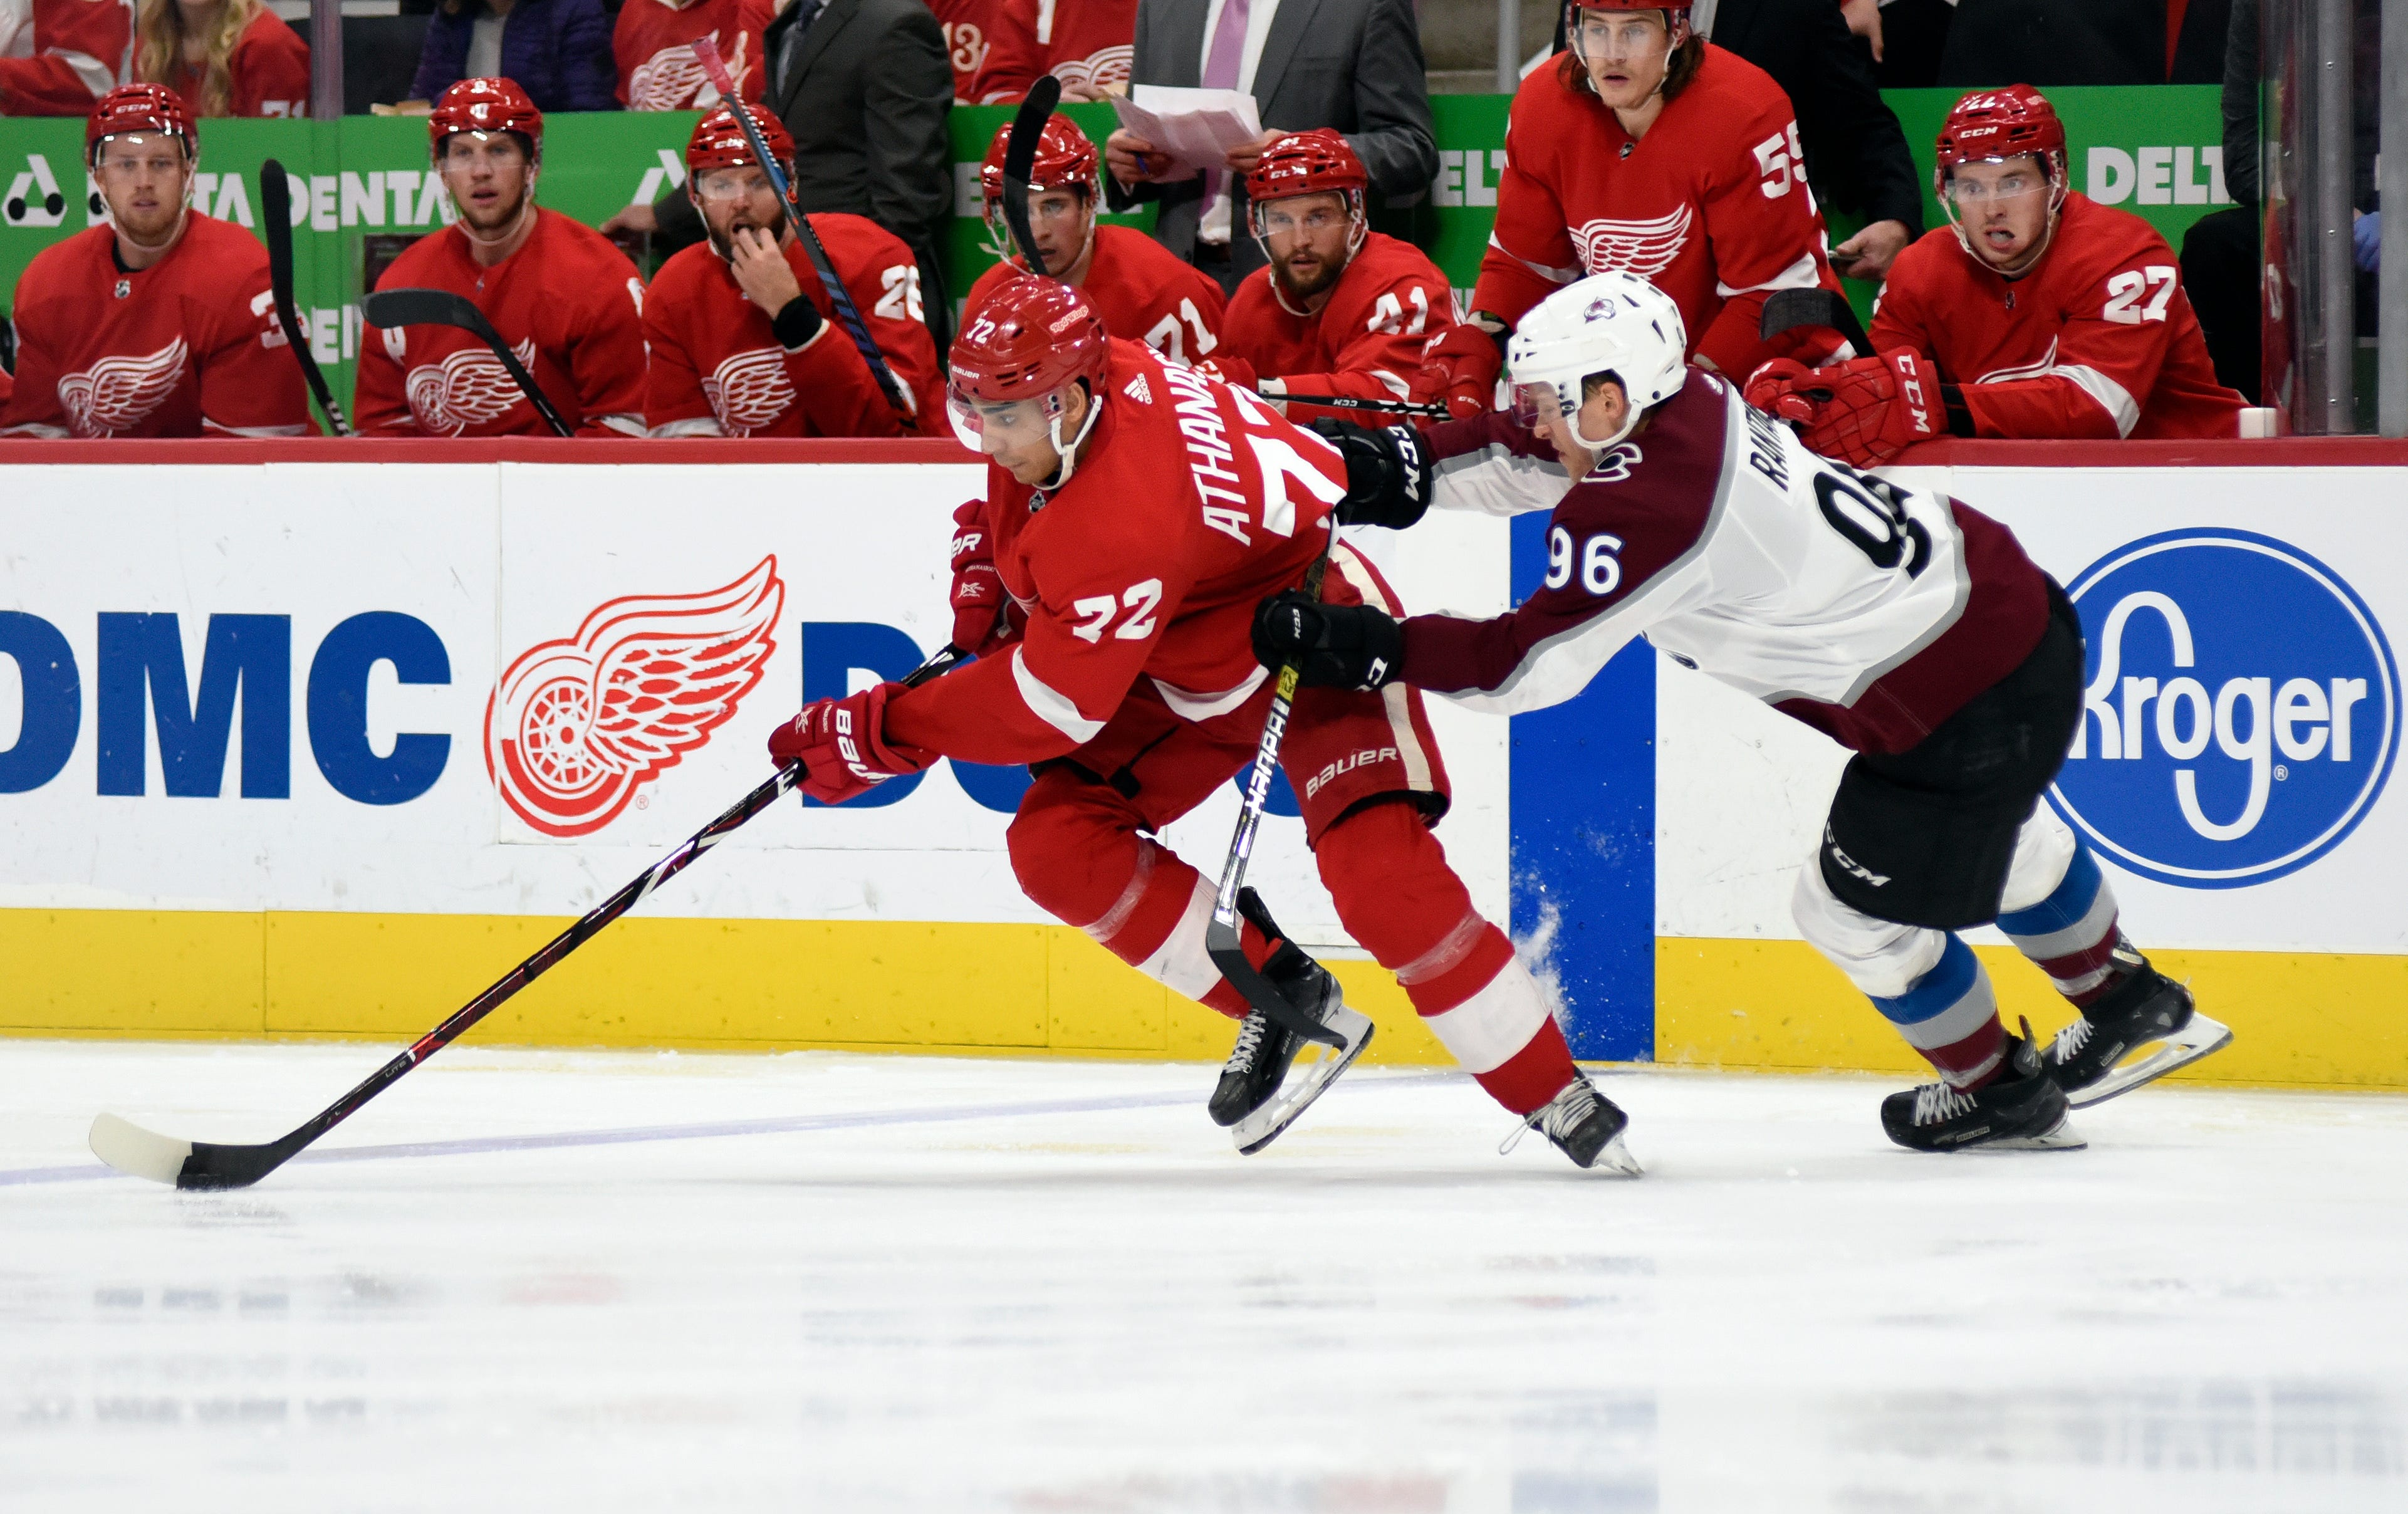 Red Wings center Andreas Athanasiou, left, moves the puck away from Avalanche right wing Mikko Rantanen during the second period.